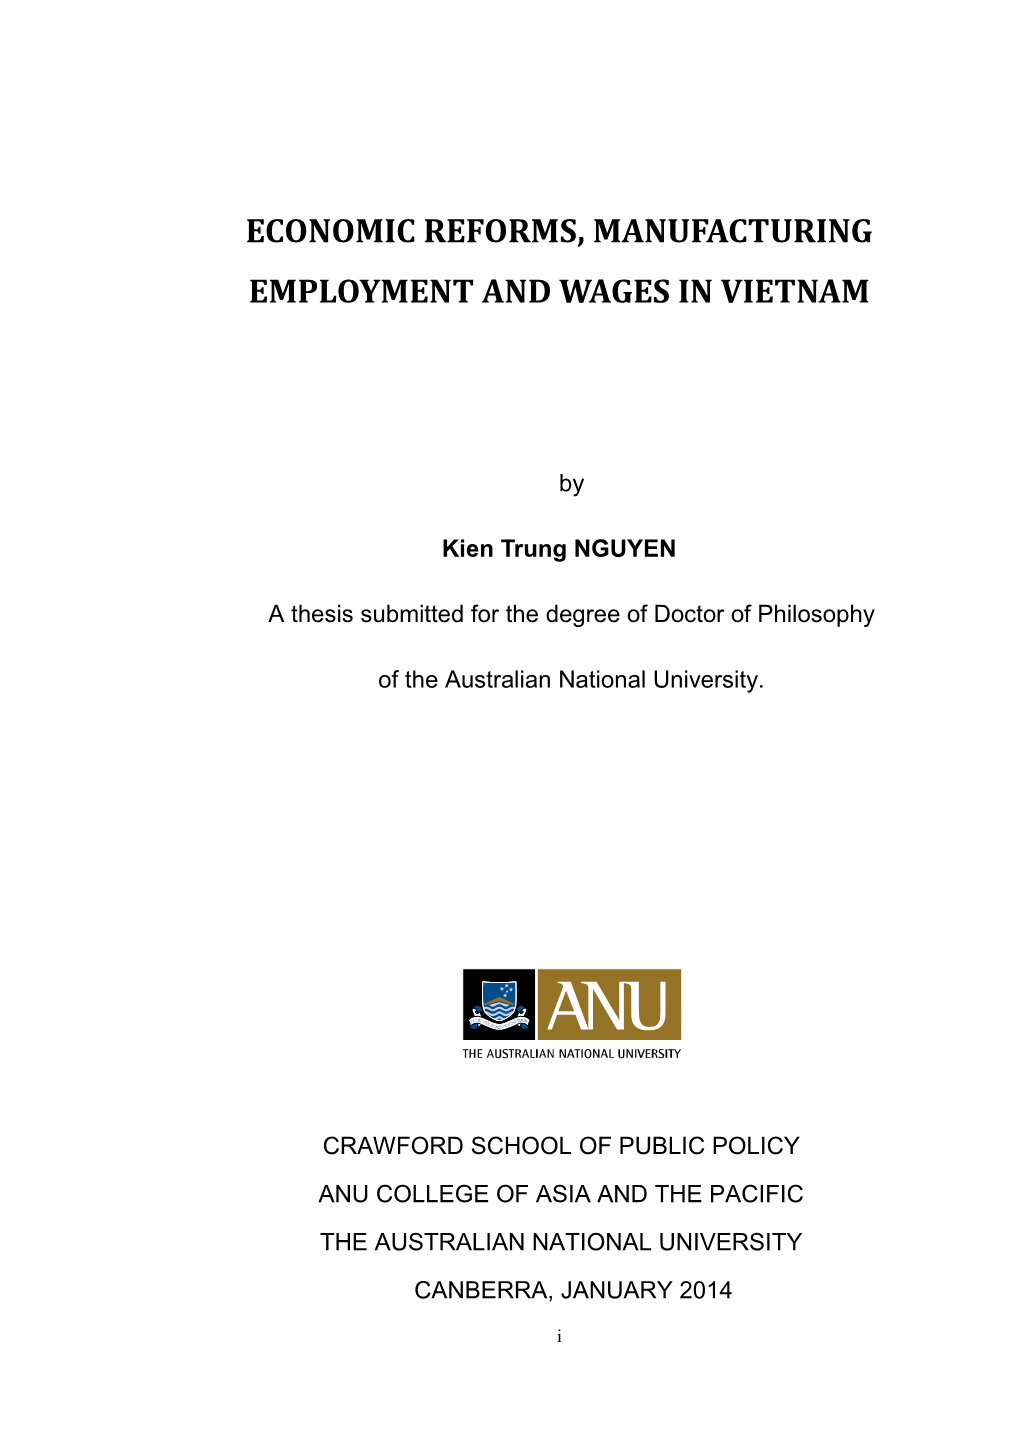 Economic Reforms, Manufacturing Employment and Wages in Vietnam